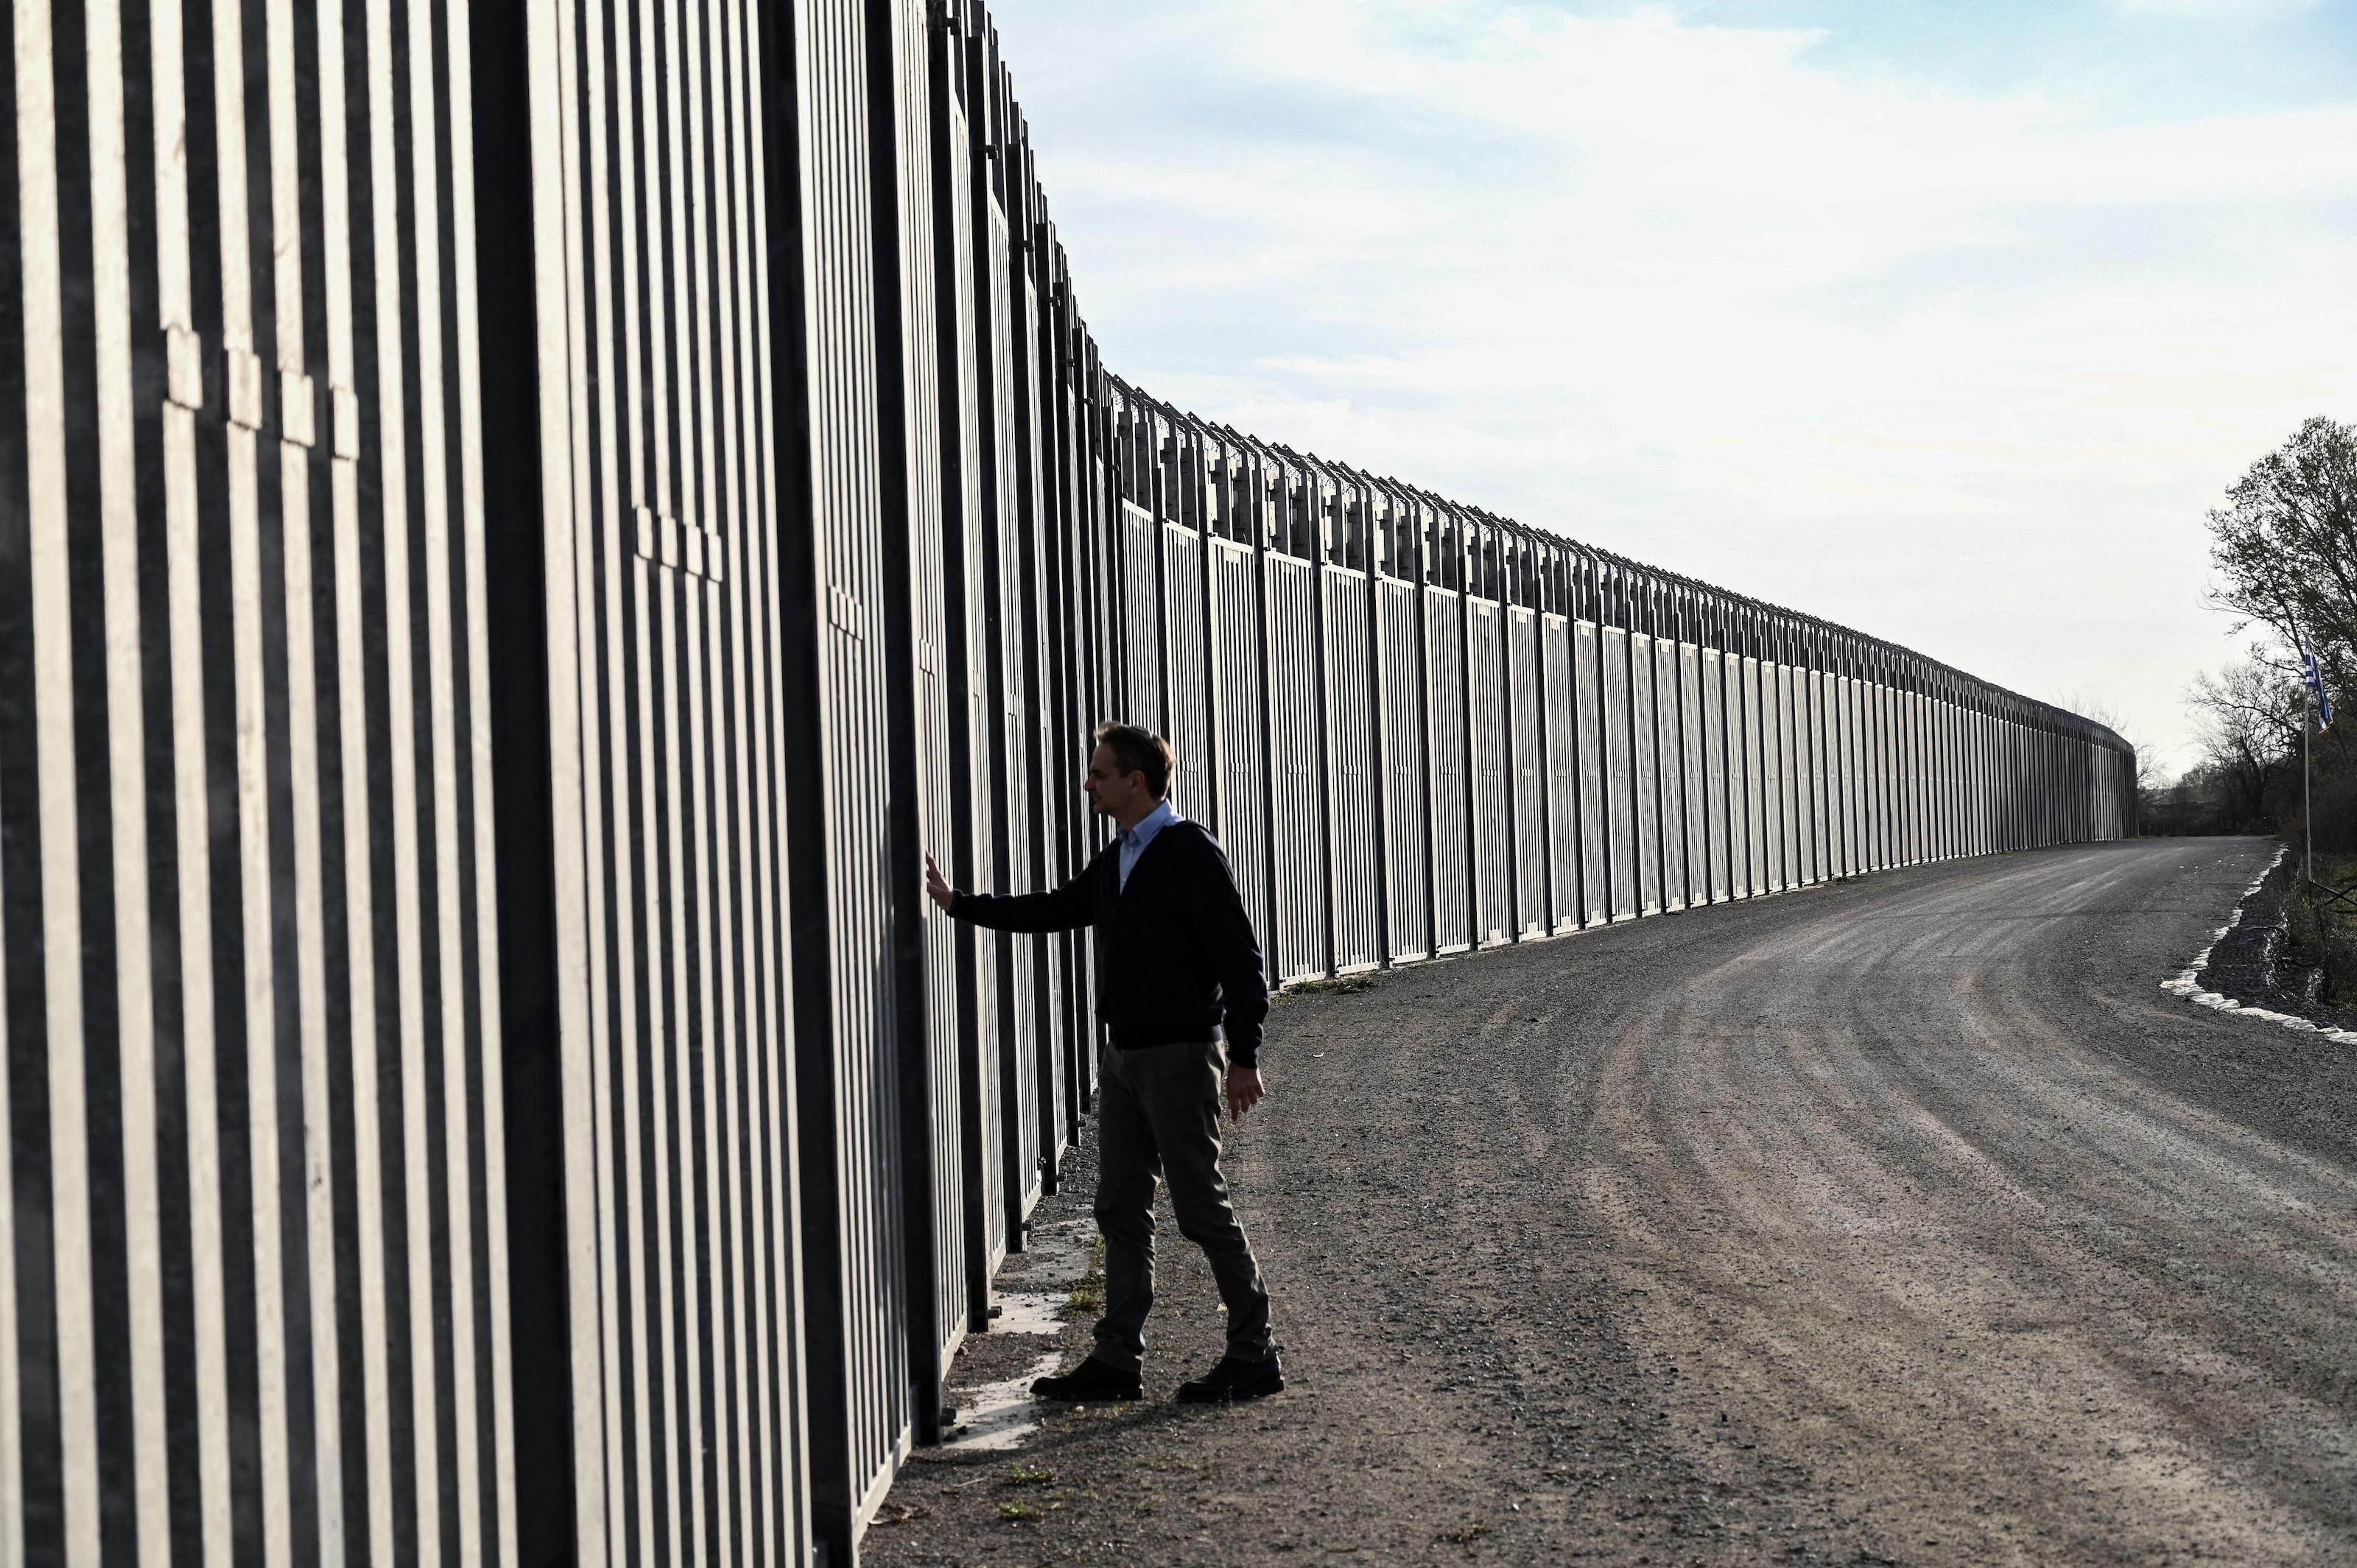 Greek Prime Minister Kyriakos Mitsotakis walks next to a  steel fence during a ceremony marking the signing of the extension to the country's steel fence on the border with Turkey, in Feres on March 31, 2023. 